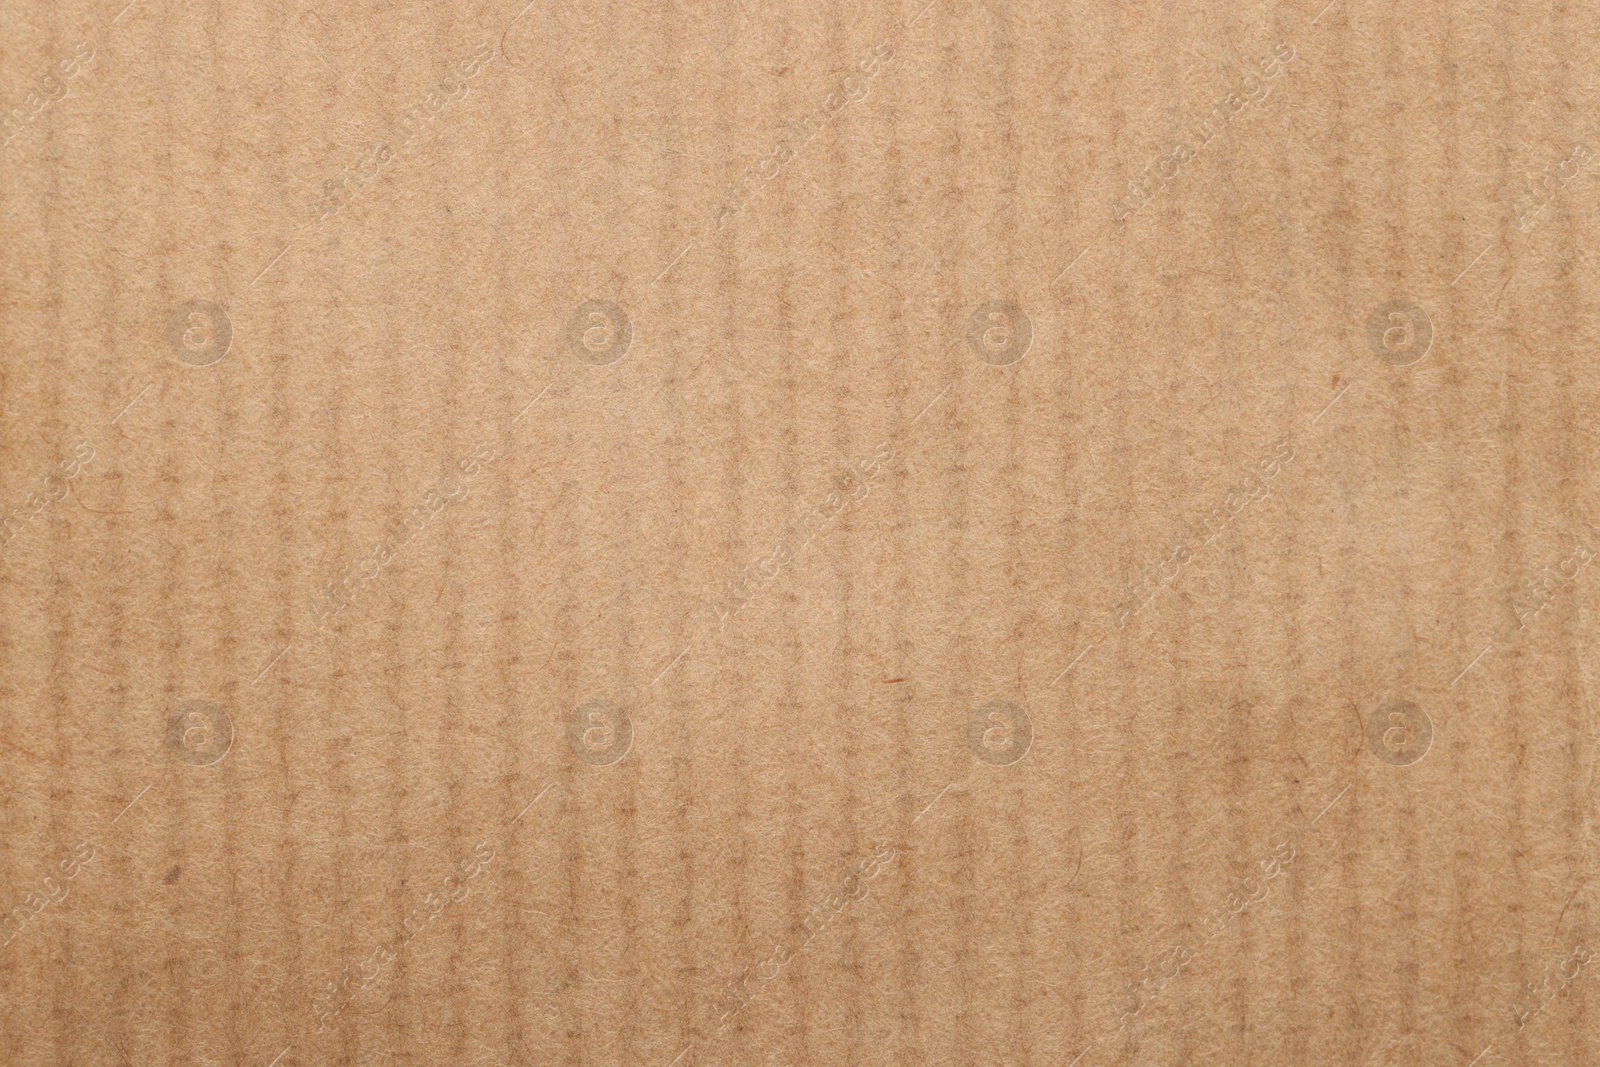 Photo of Texture of beige paper sheet as background, top view